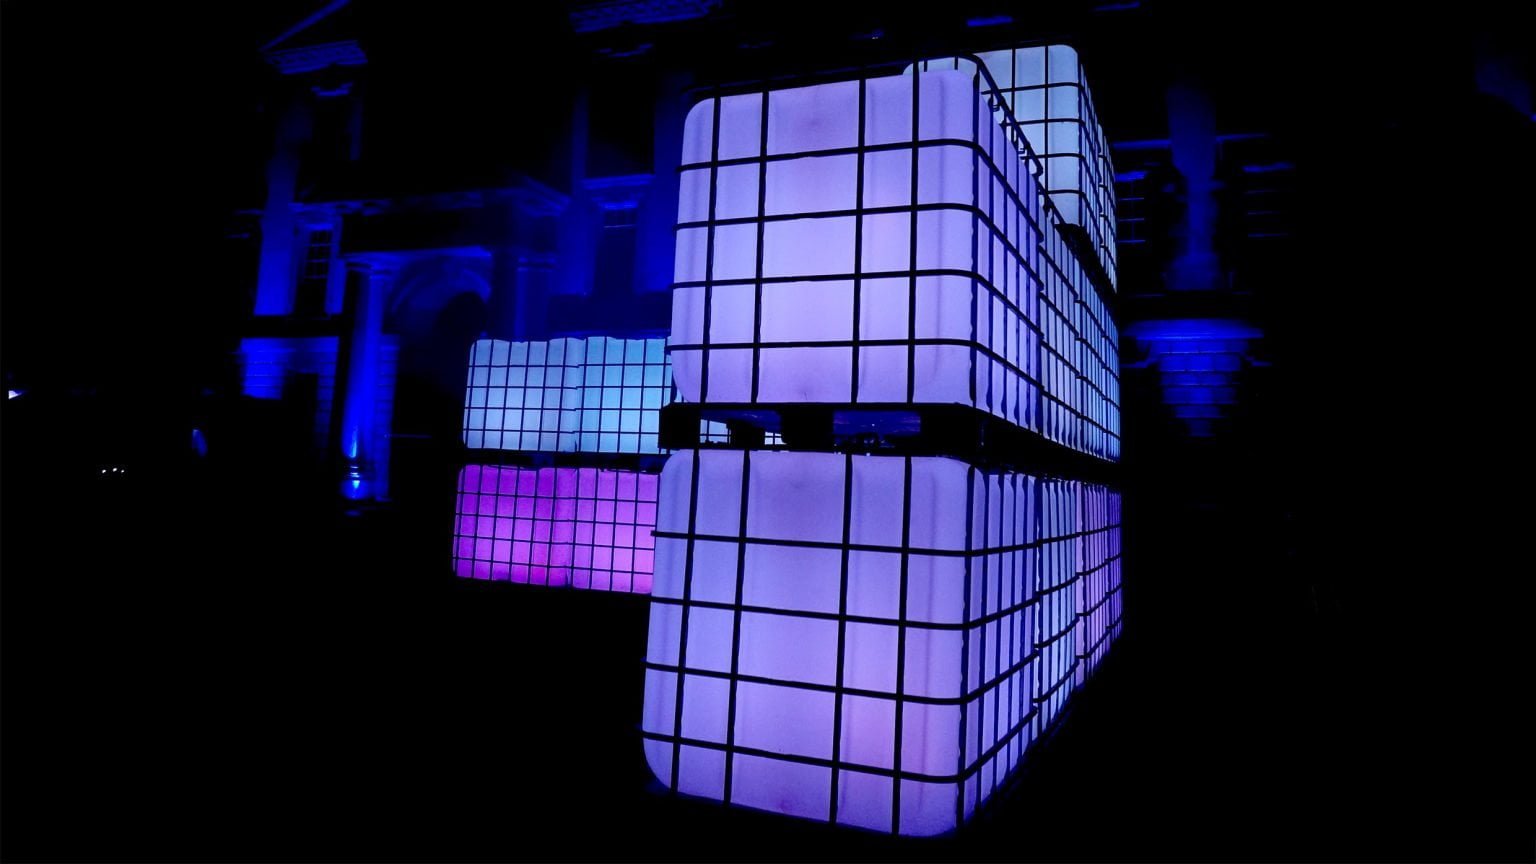 Cubes @ Glitch, Kings College